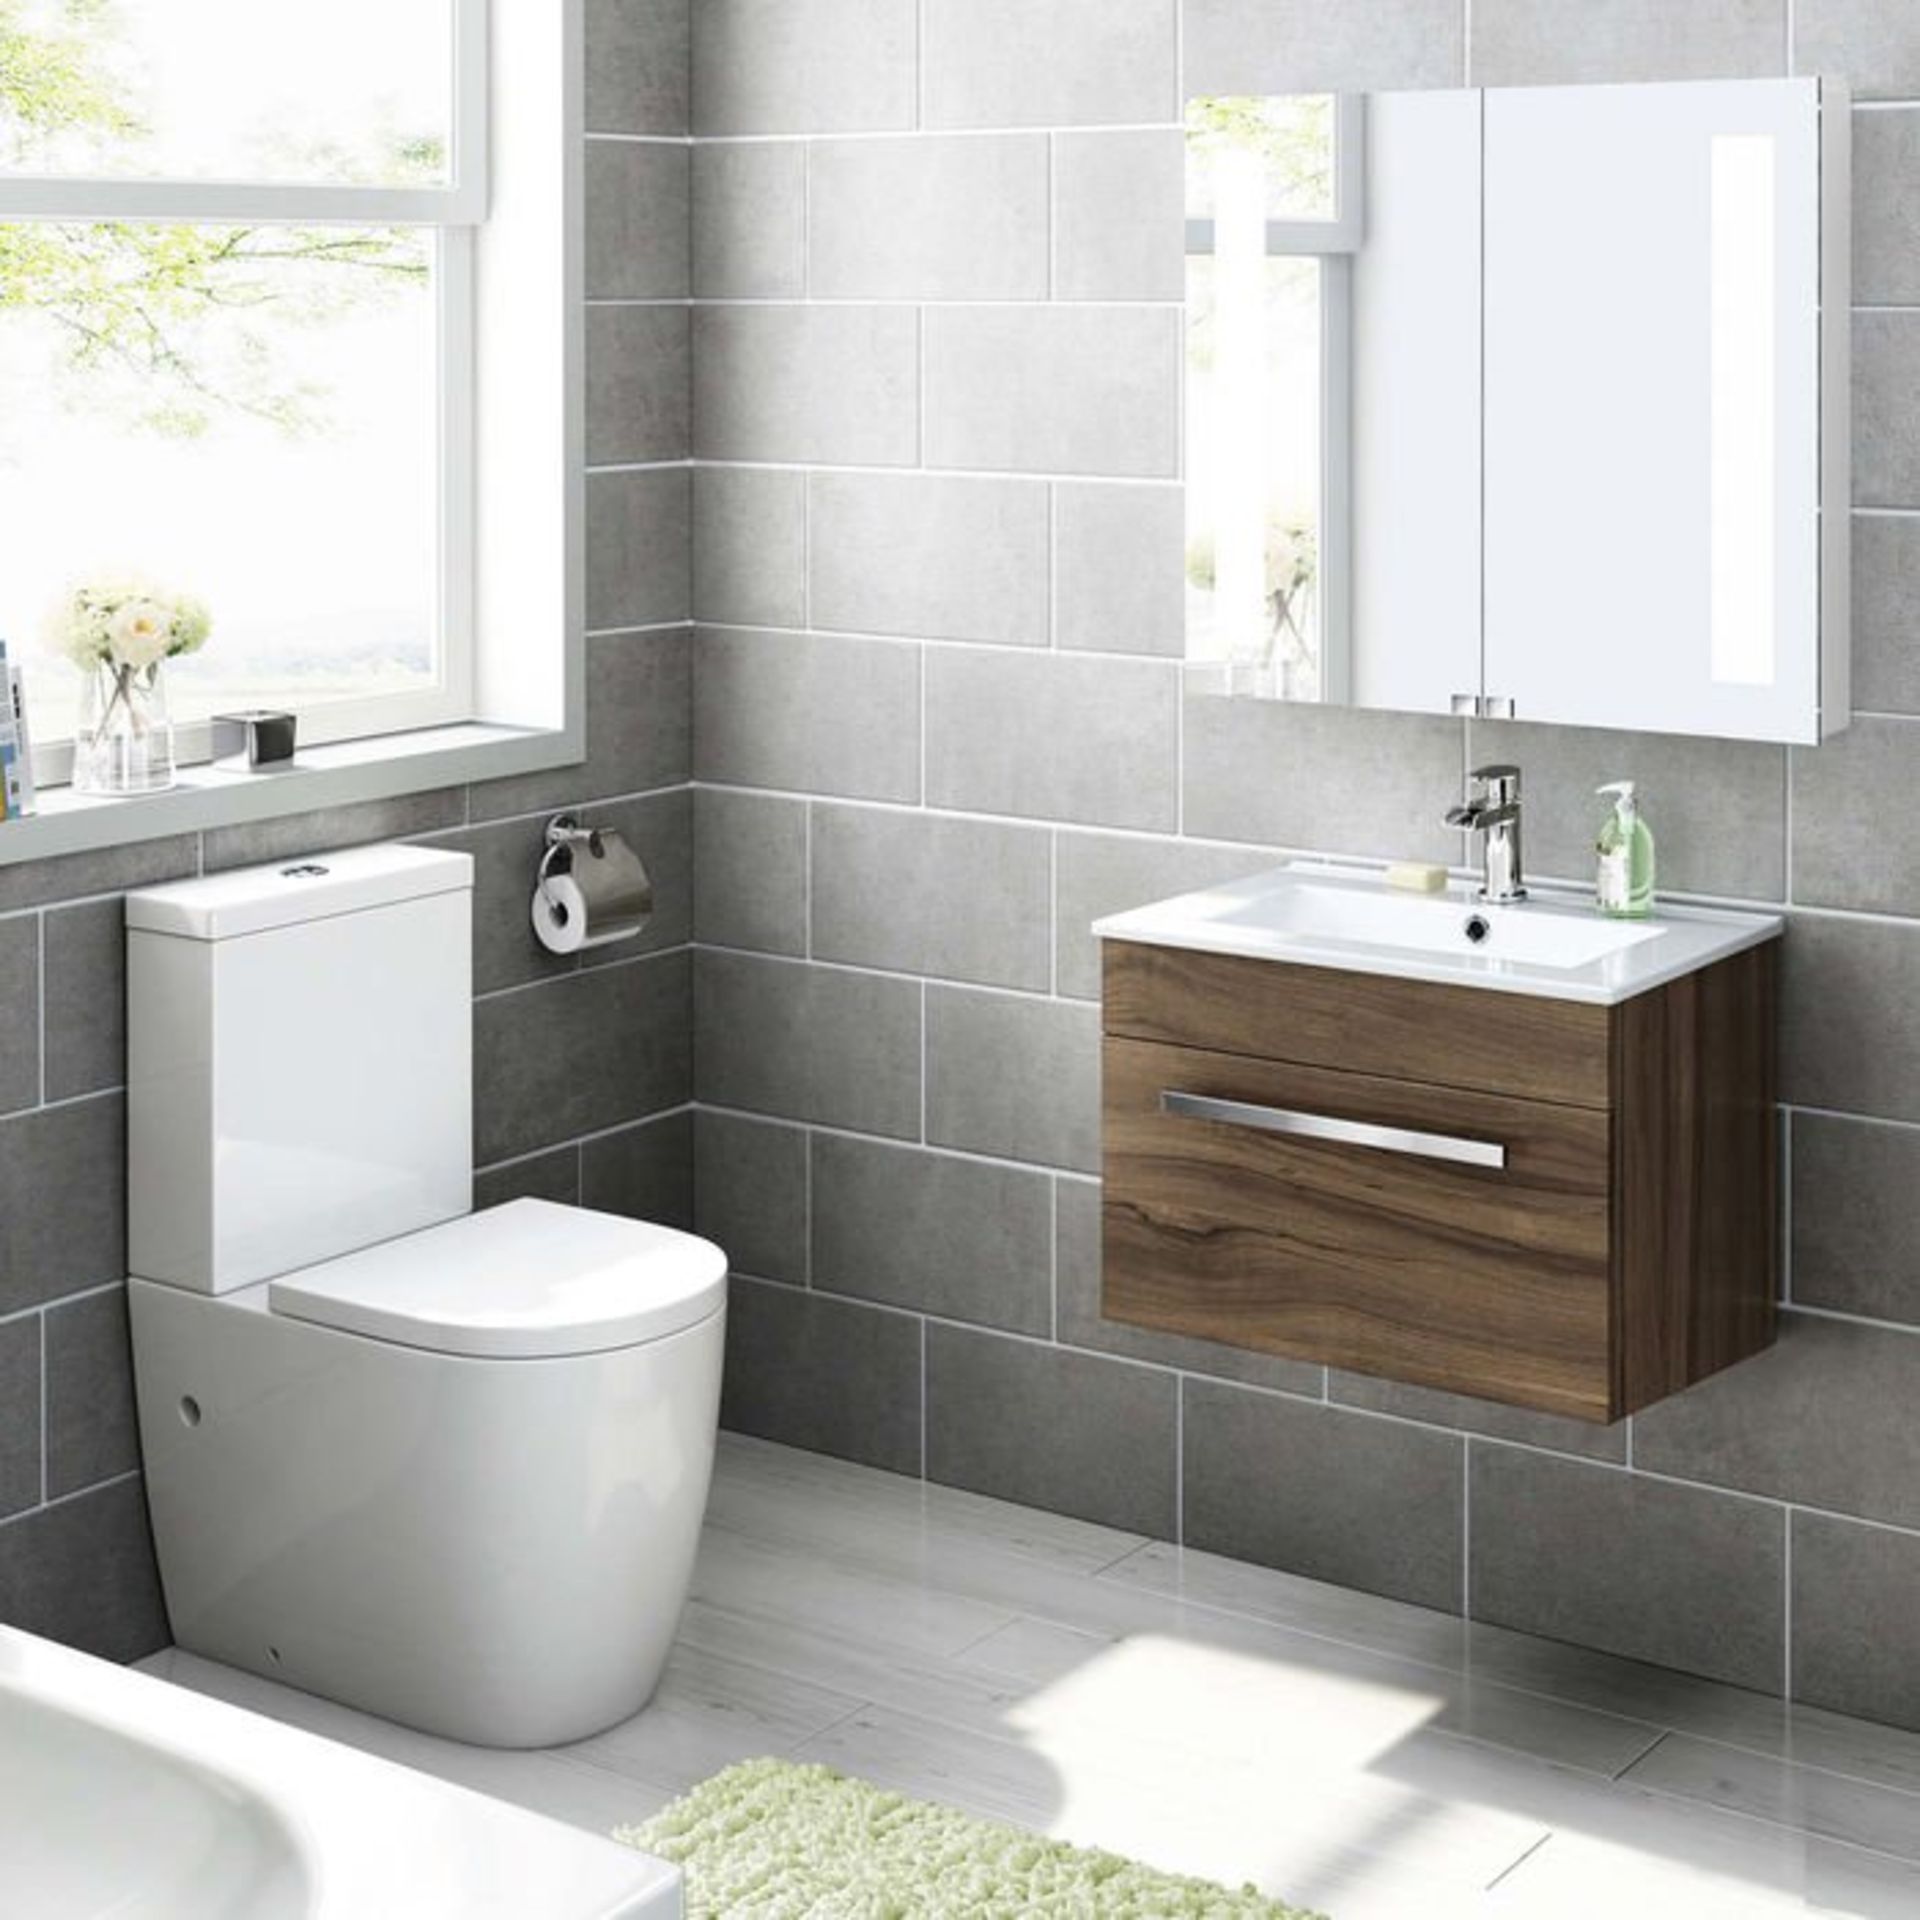 (S57) 600mm Avon Walnut Effect Basin Cabinet - Wall Hung RRP £449.99. COMES COMPLETE WITH BASIN. - Image 2 of 3